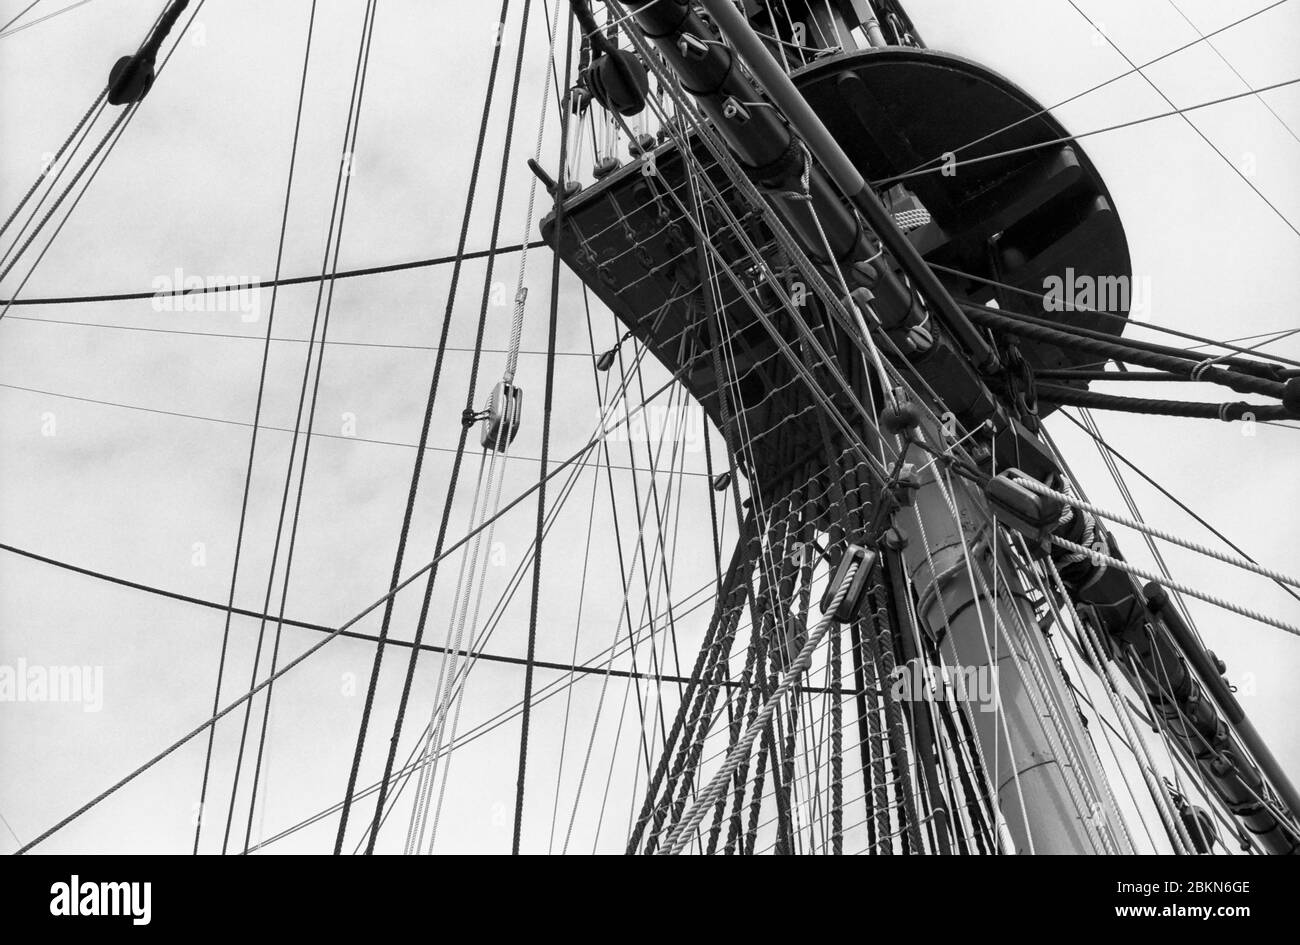 H.M.S. Victory, Nelson's flagship at the Battle of Trafalgar in No. 2 Dry Dock, Portsmouth Naval Base, Hampshire, England: close-up of one of the fighting tops, showing mast and rigging before the removal of the topmasts for restoration in 2011.  Black and white film photograph Stock Photo